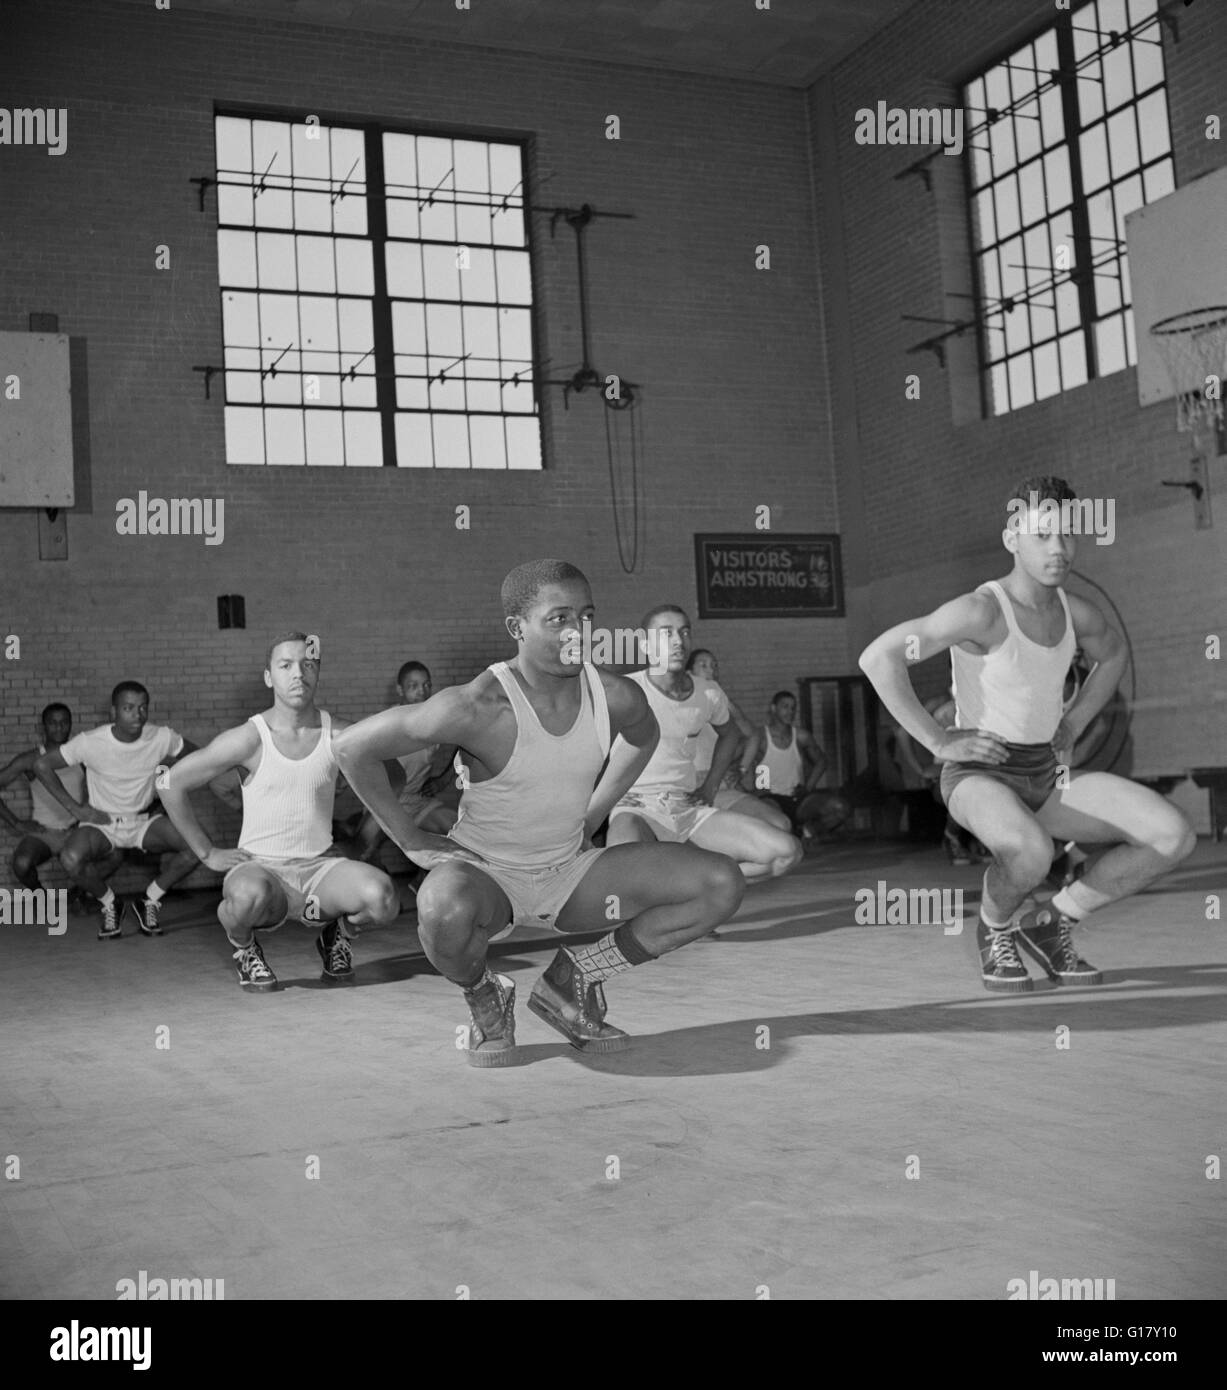 Boys Exercising in Gym Class, Armstrong Technical High School, Washington DC, USA, Marjorie Collins for Farm Security Administration, March 1942 Stock Photo